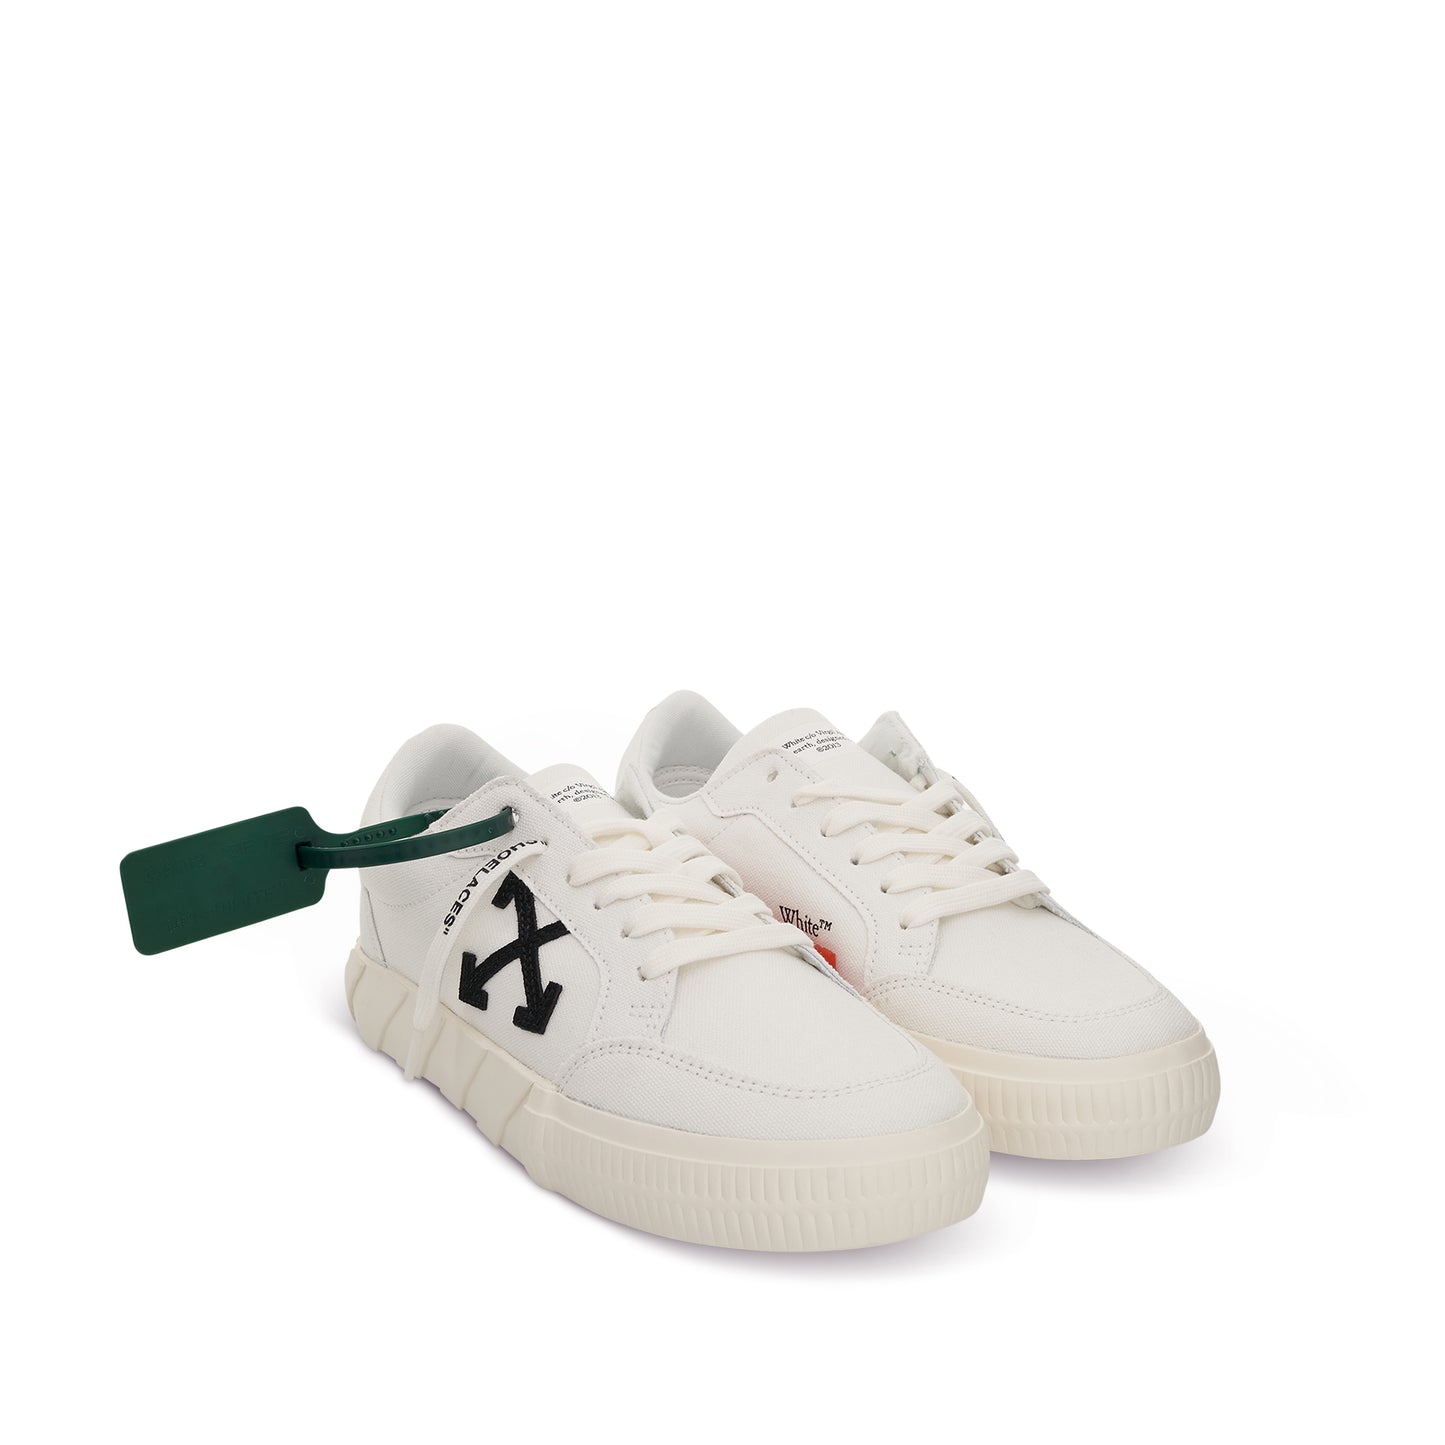 Low Vulcanized Canvas Sneakers in White & Black Colour